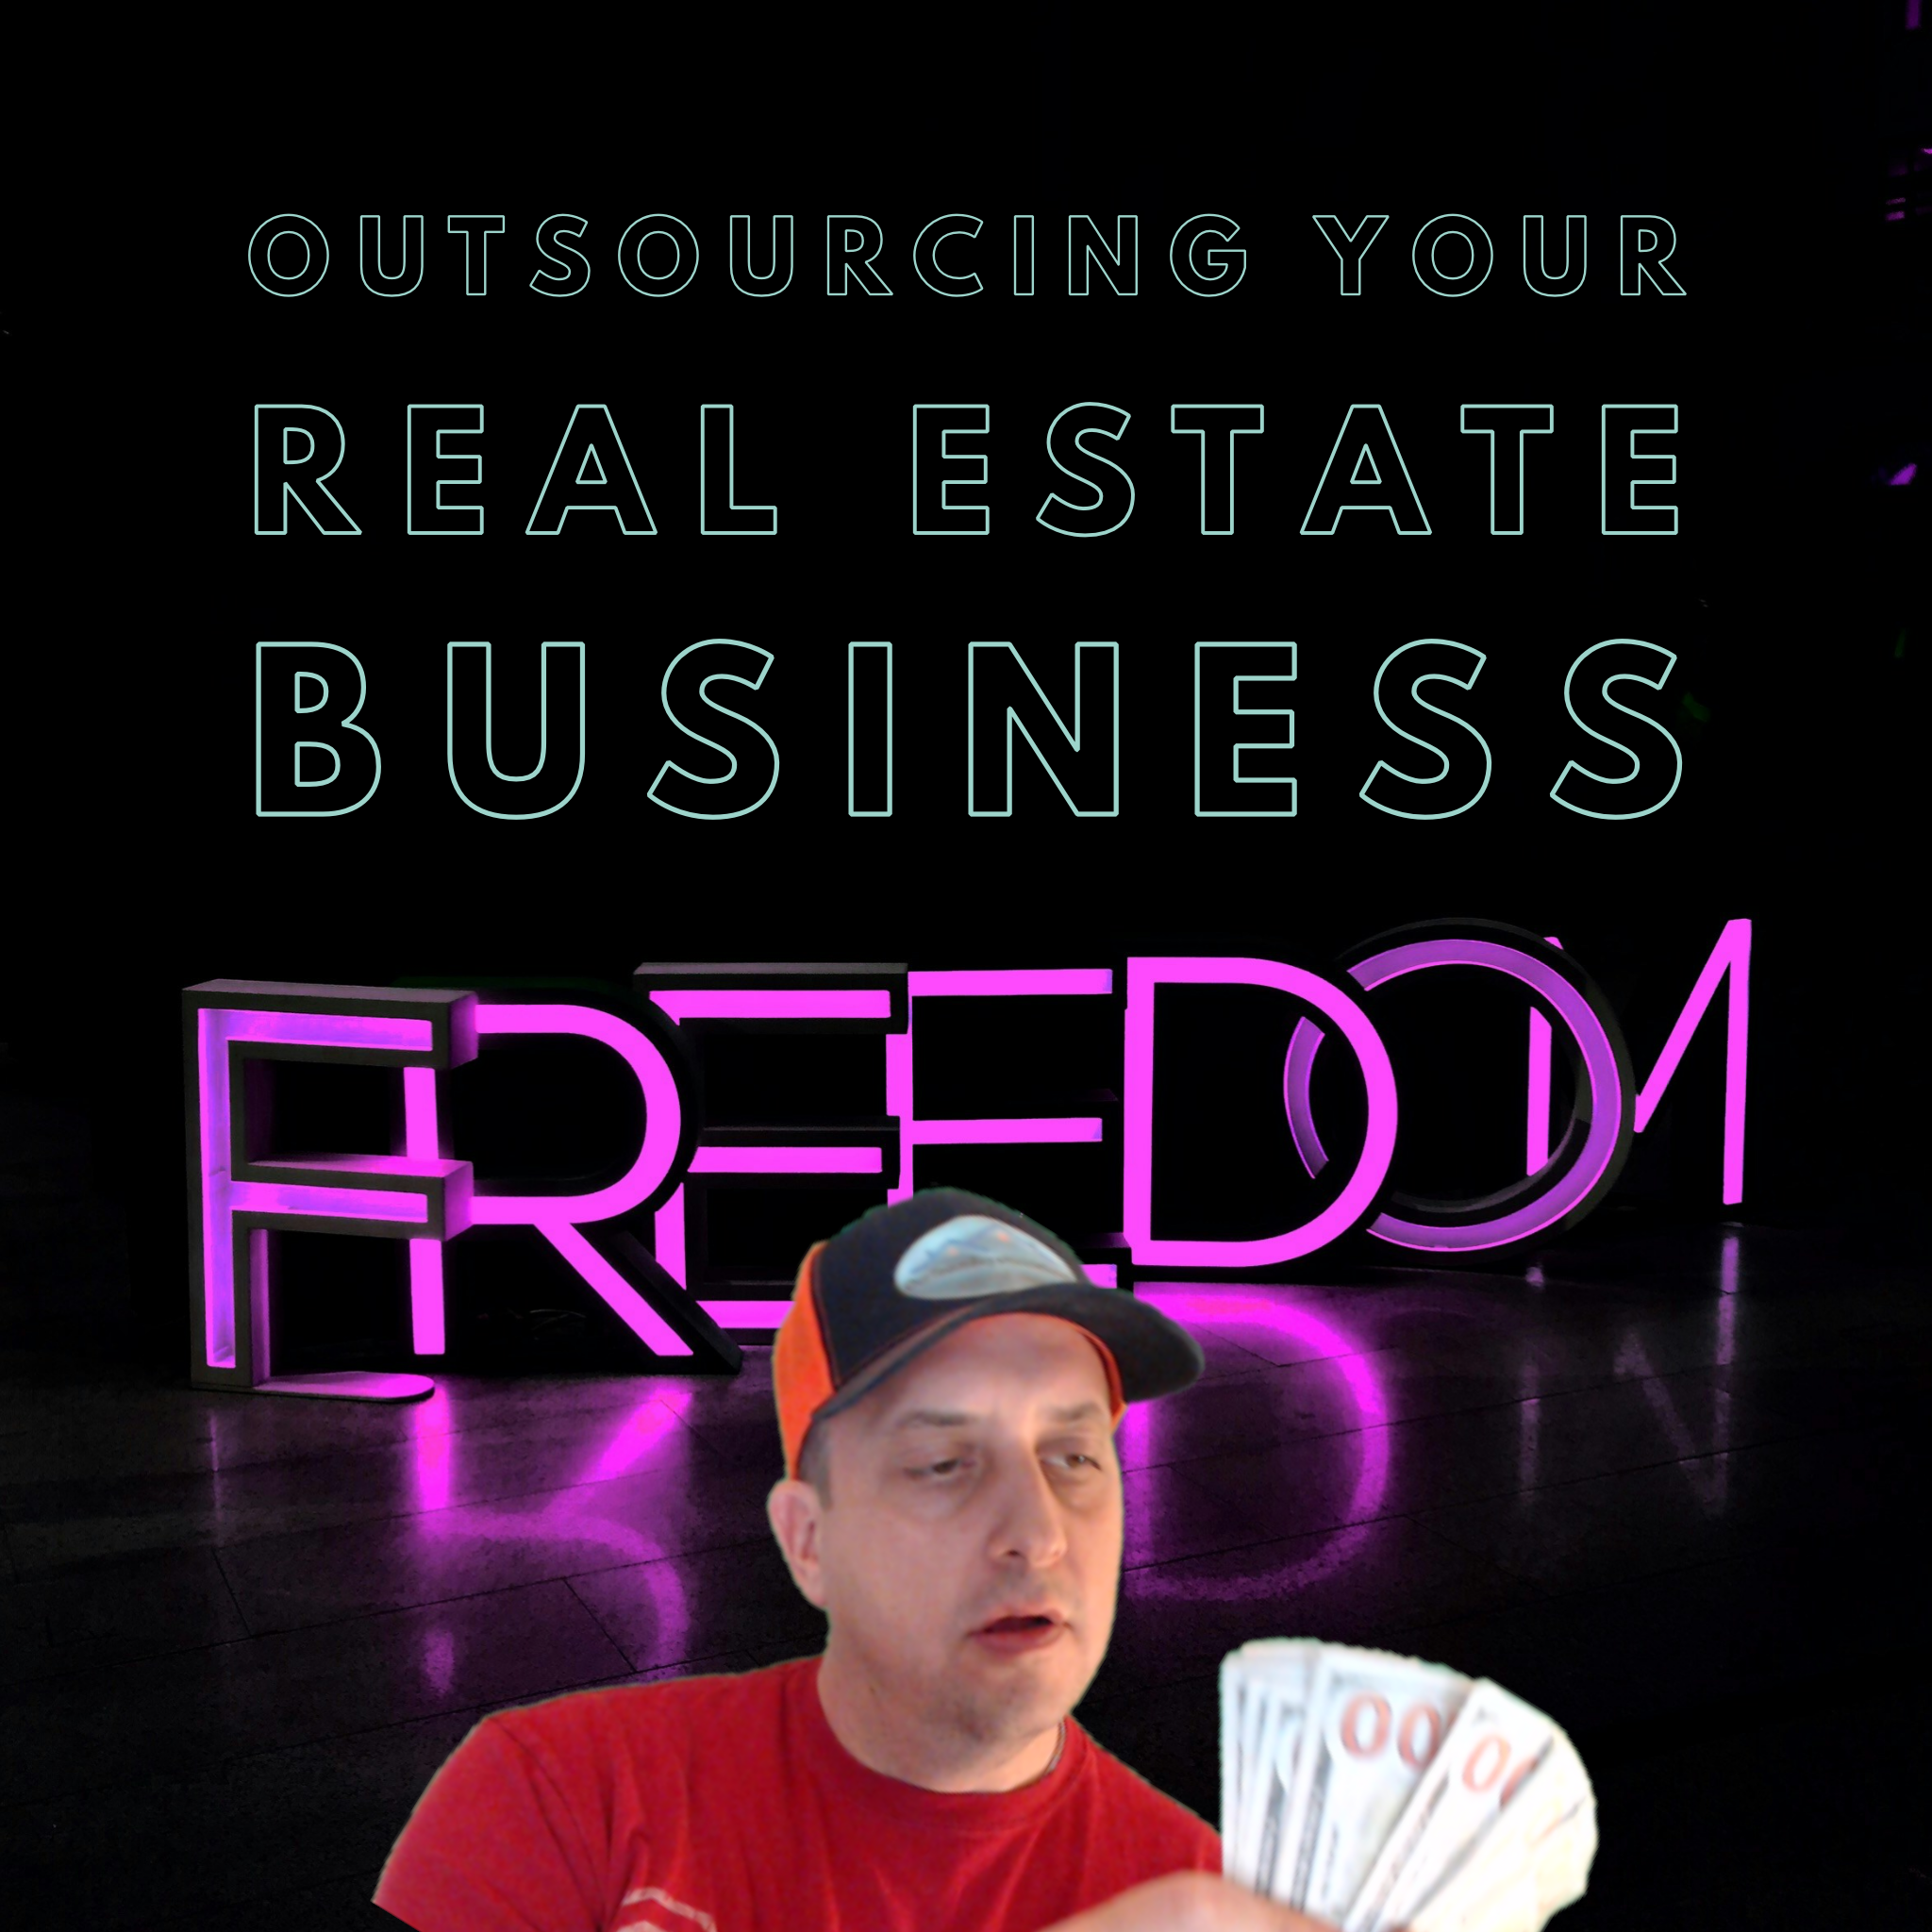 Everything You Need to Start Outsourcing Your Creative Real Estate Business Complete Workbook w/ Video Training